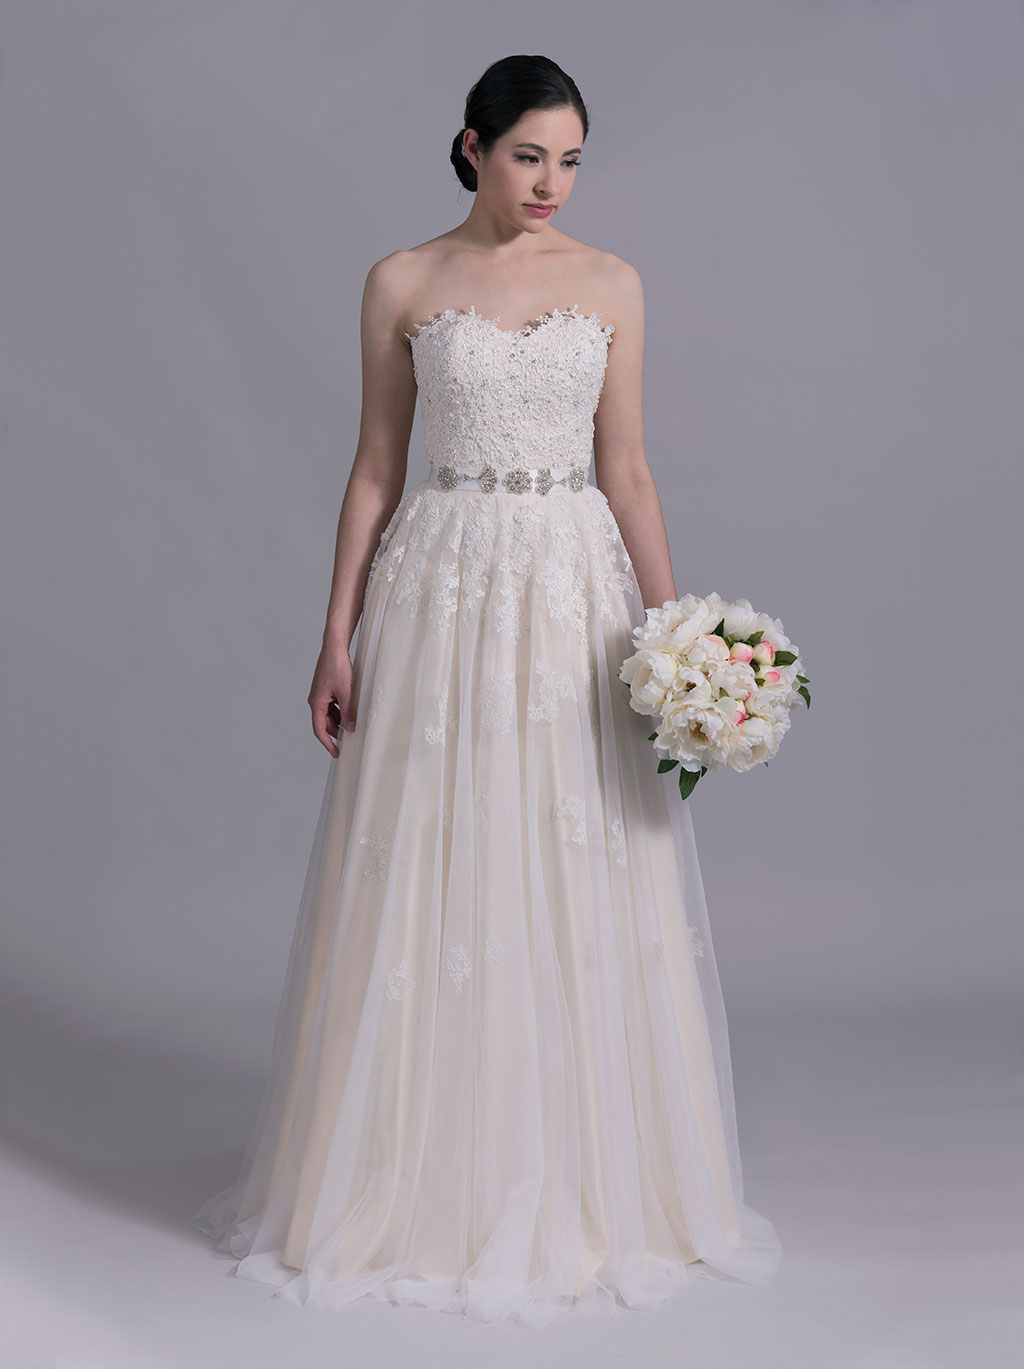 Strapless lace wedding dress in champagne 4015